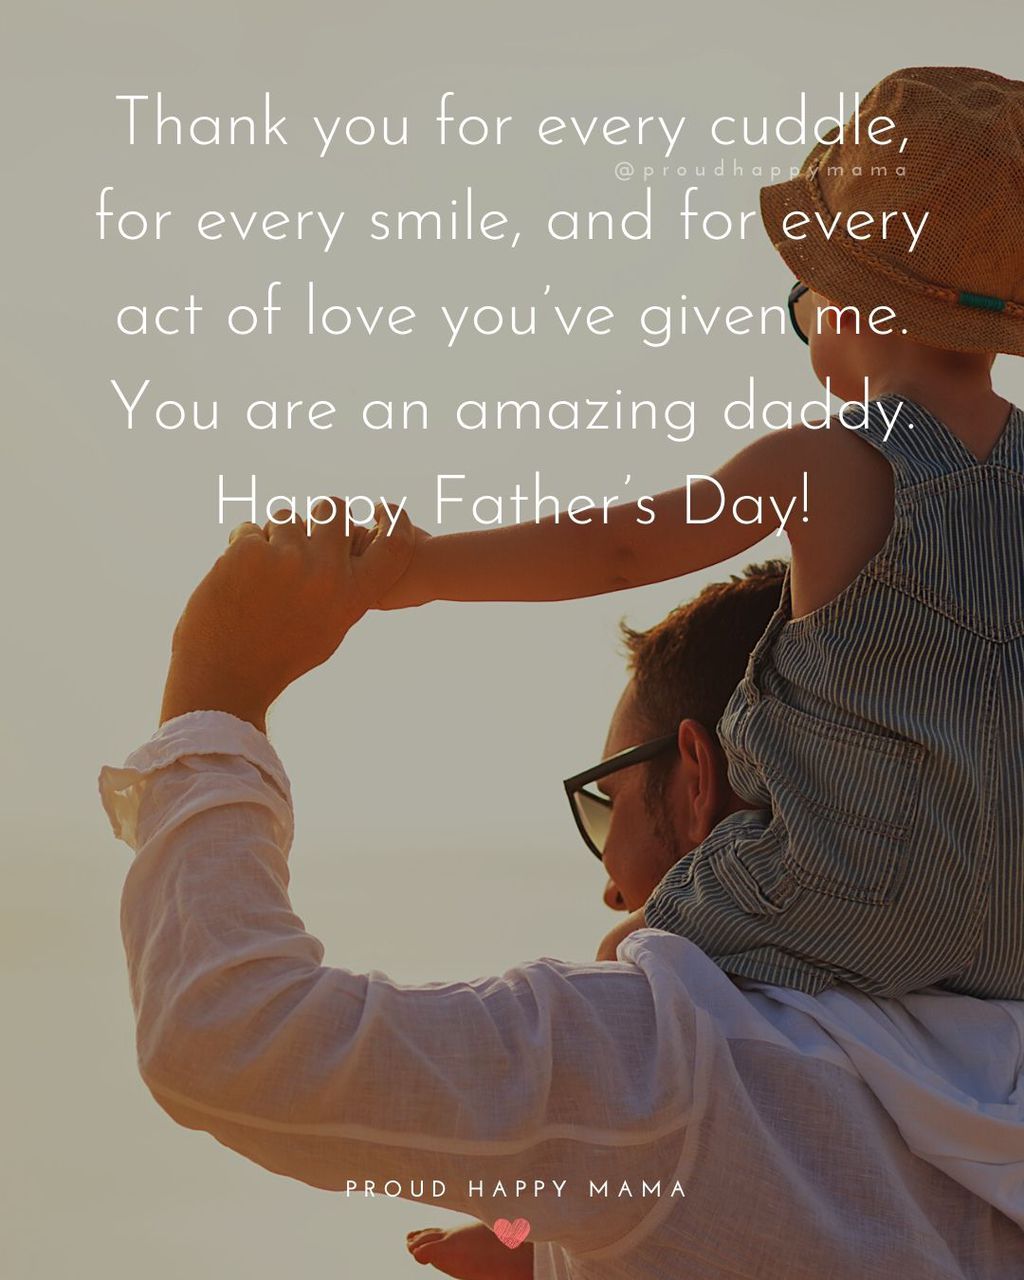 70-best-happy-first-father-s-day-quotes-and-sayings-with-images